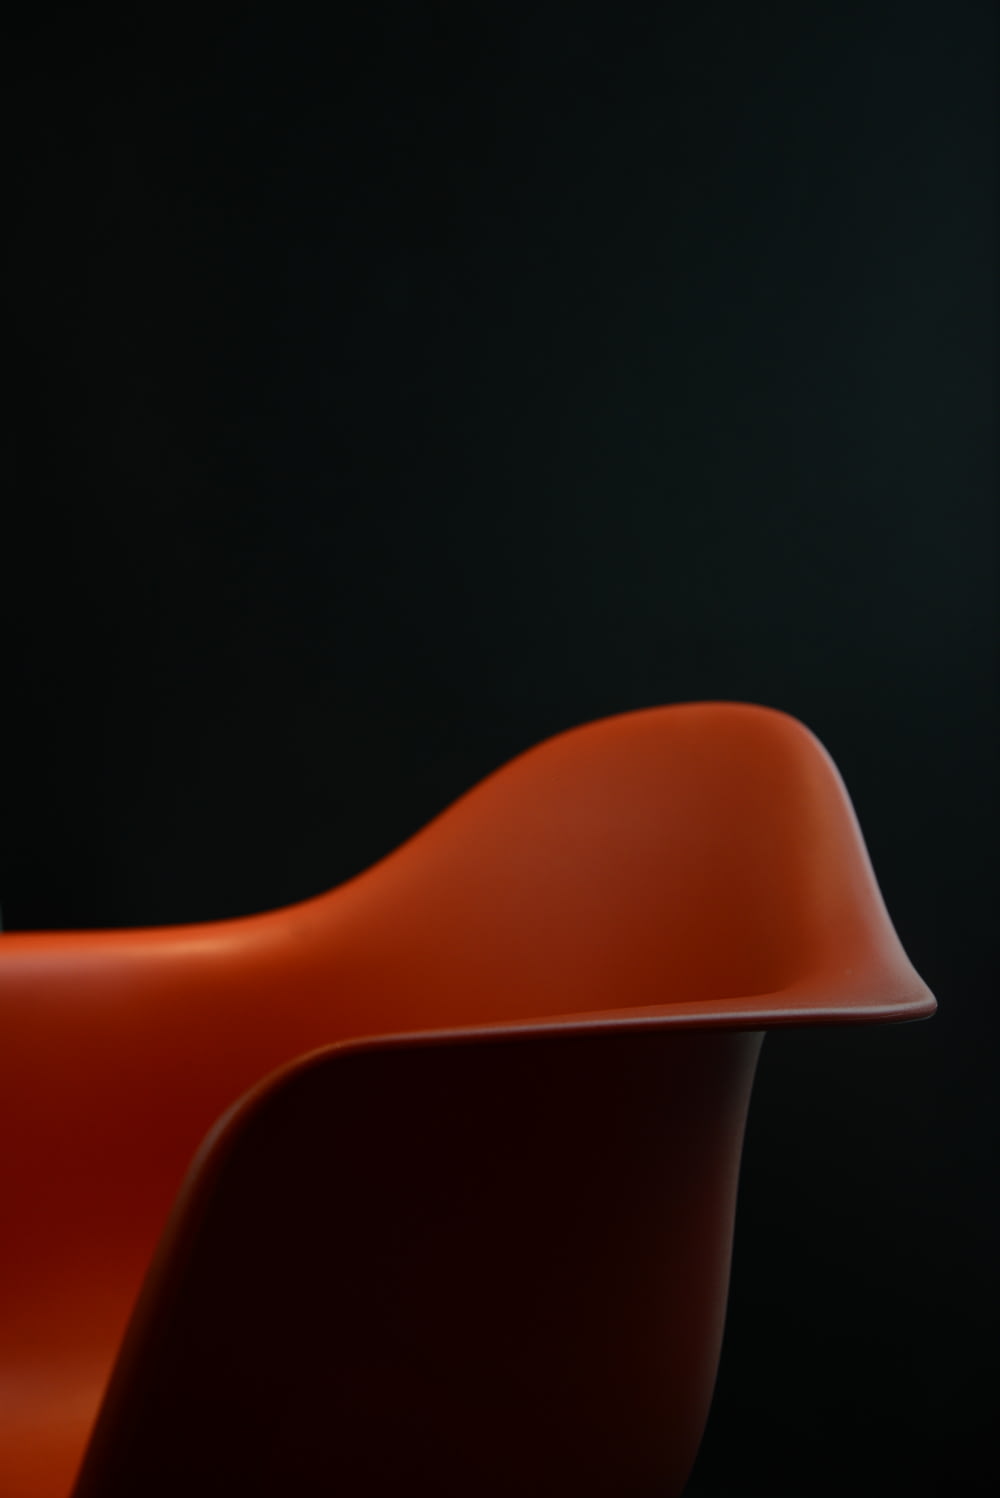 red plastic chair on black background